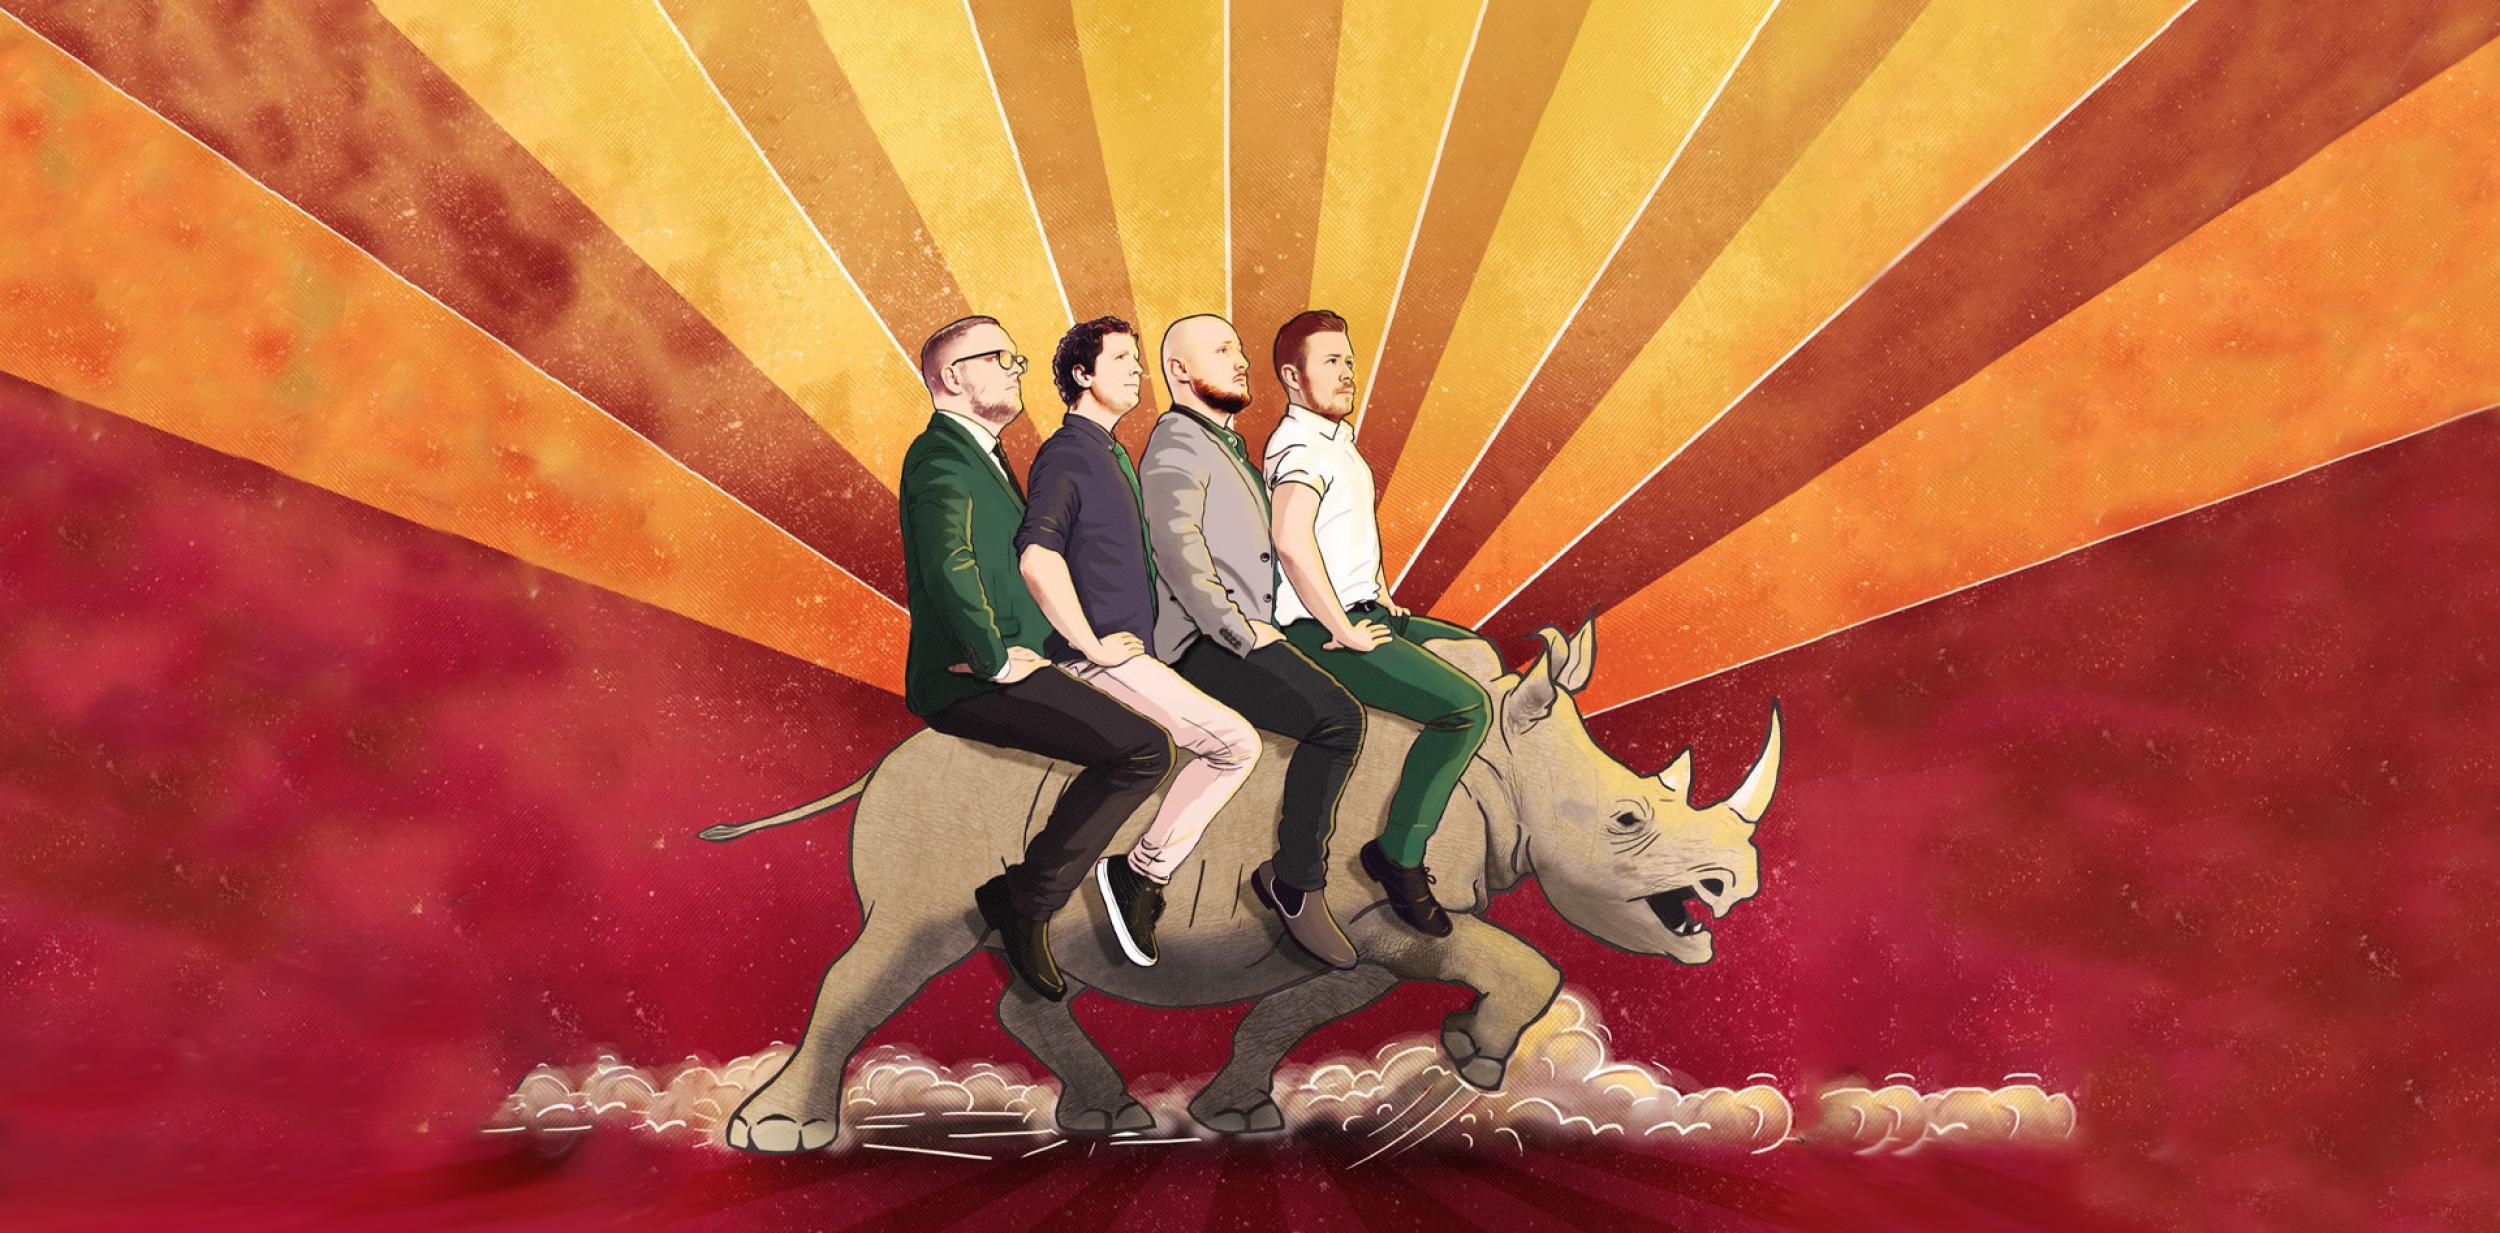 Illustration of four people riding a rhino